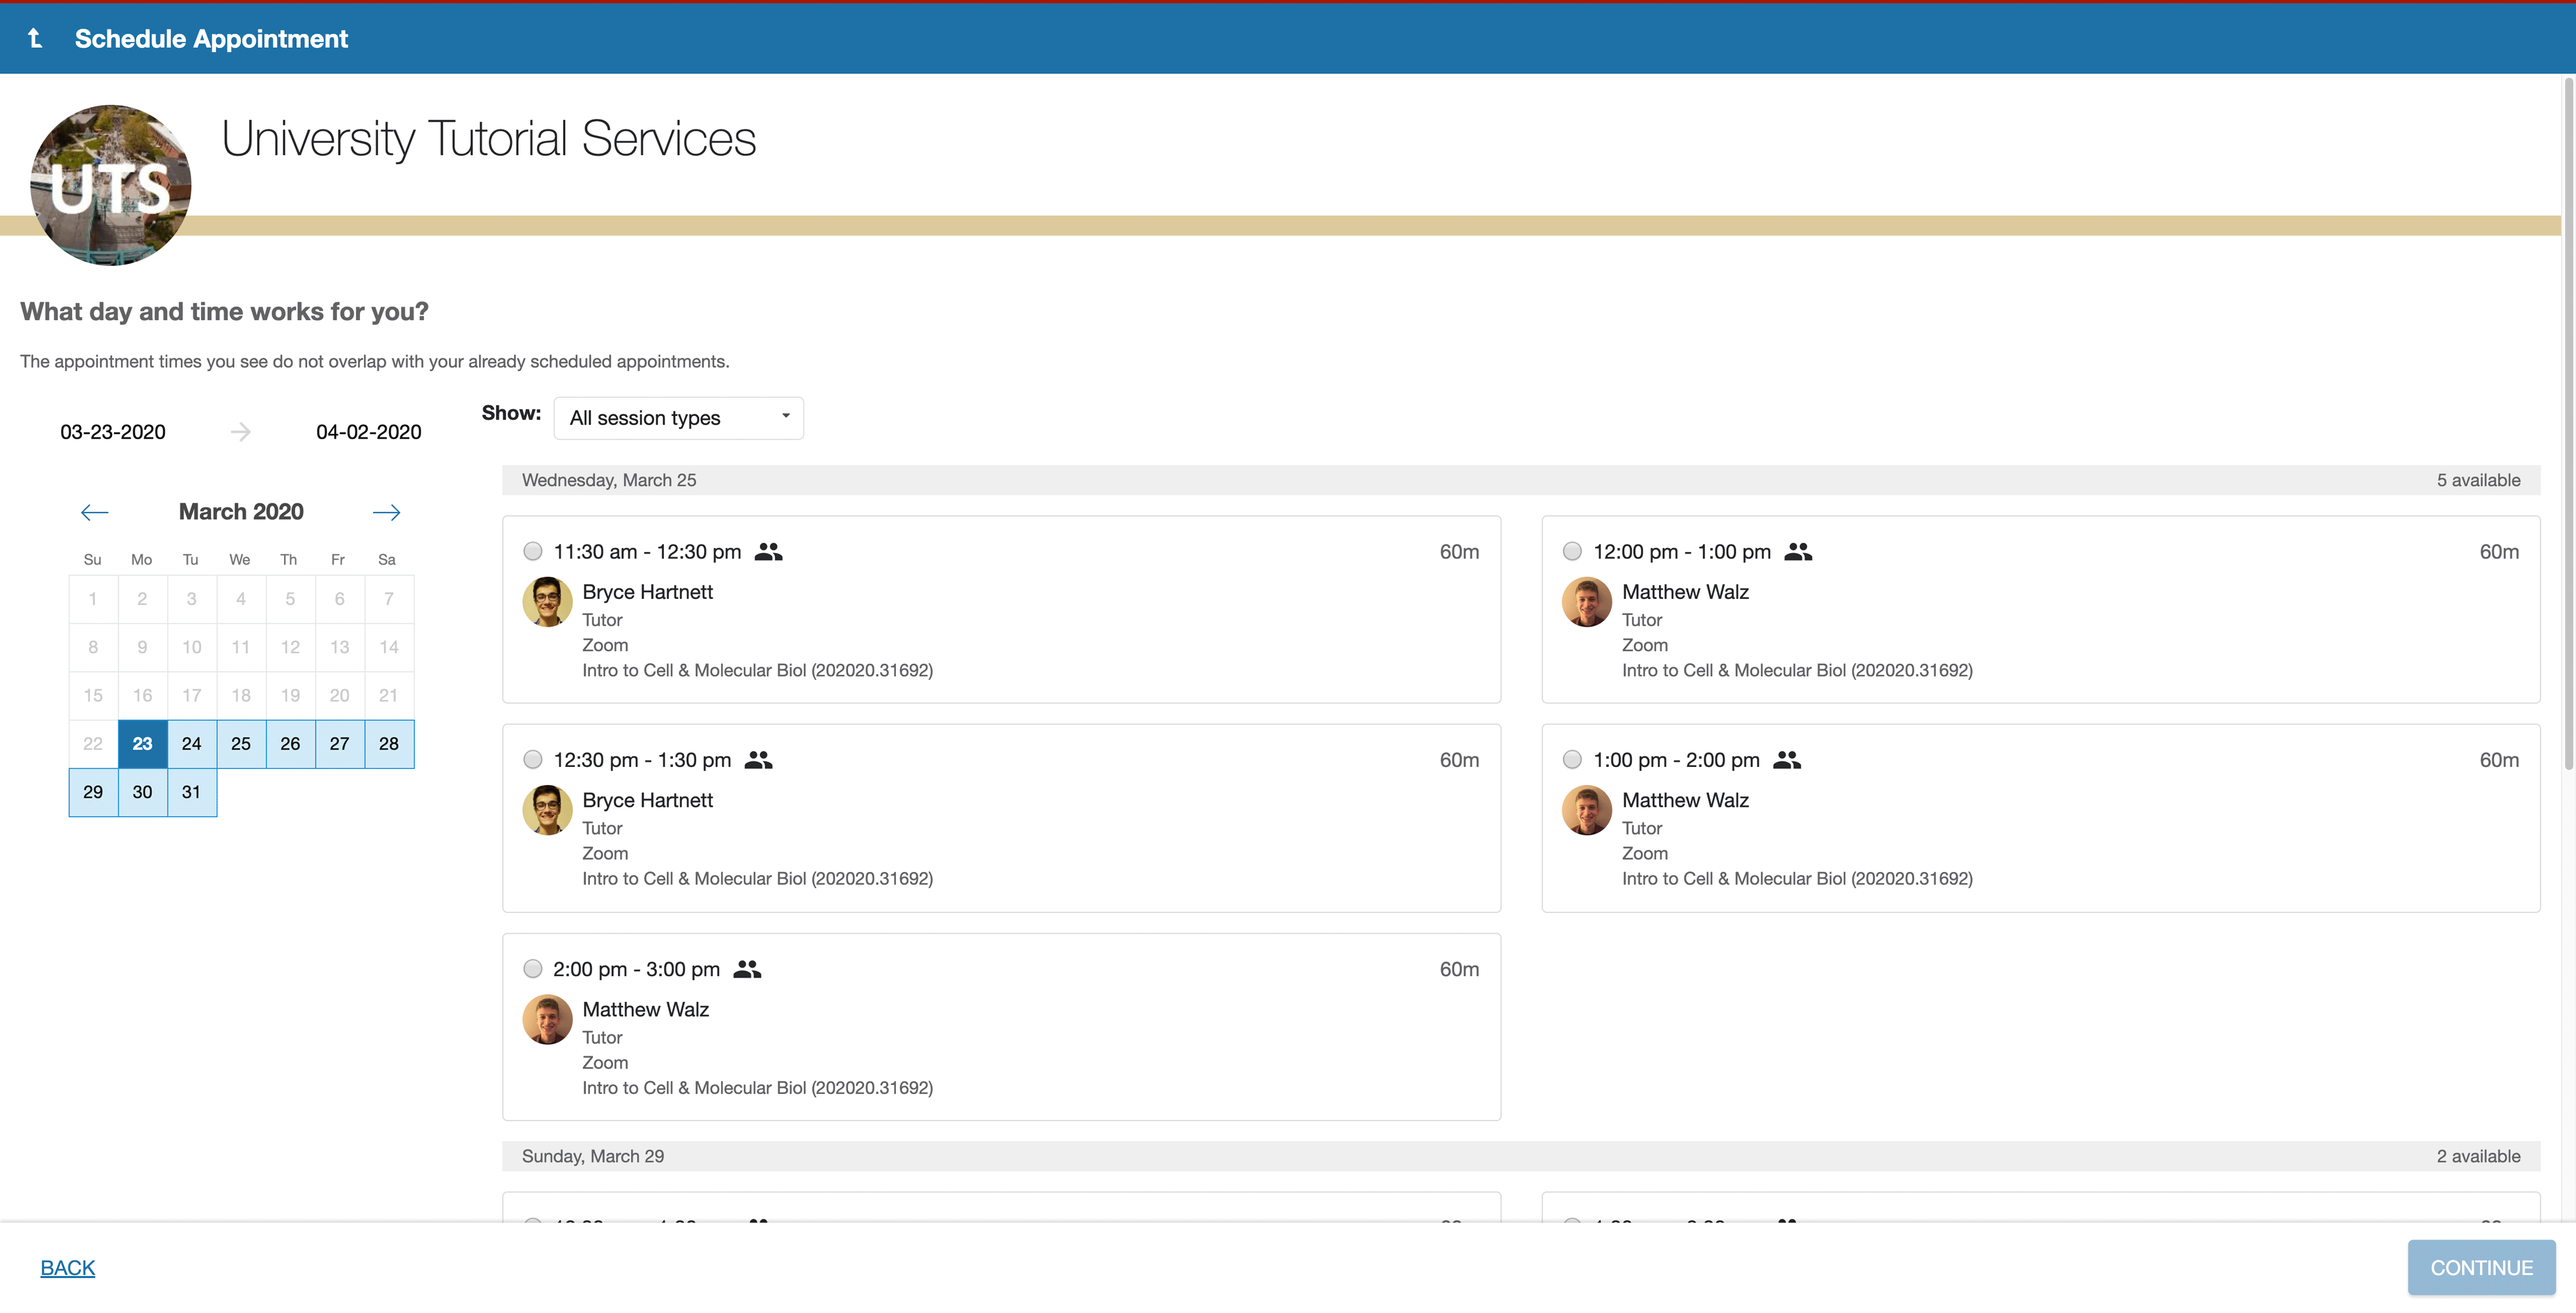 Screenshot of calendar of available tutoring sessions